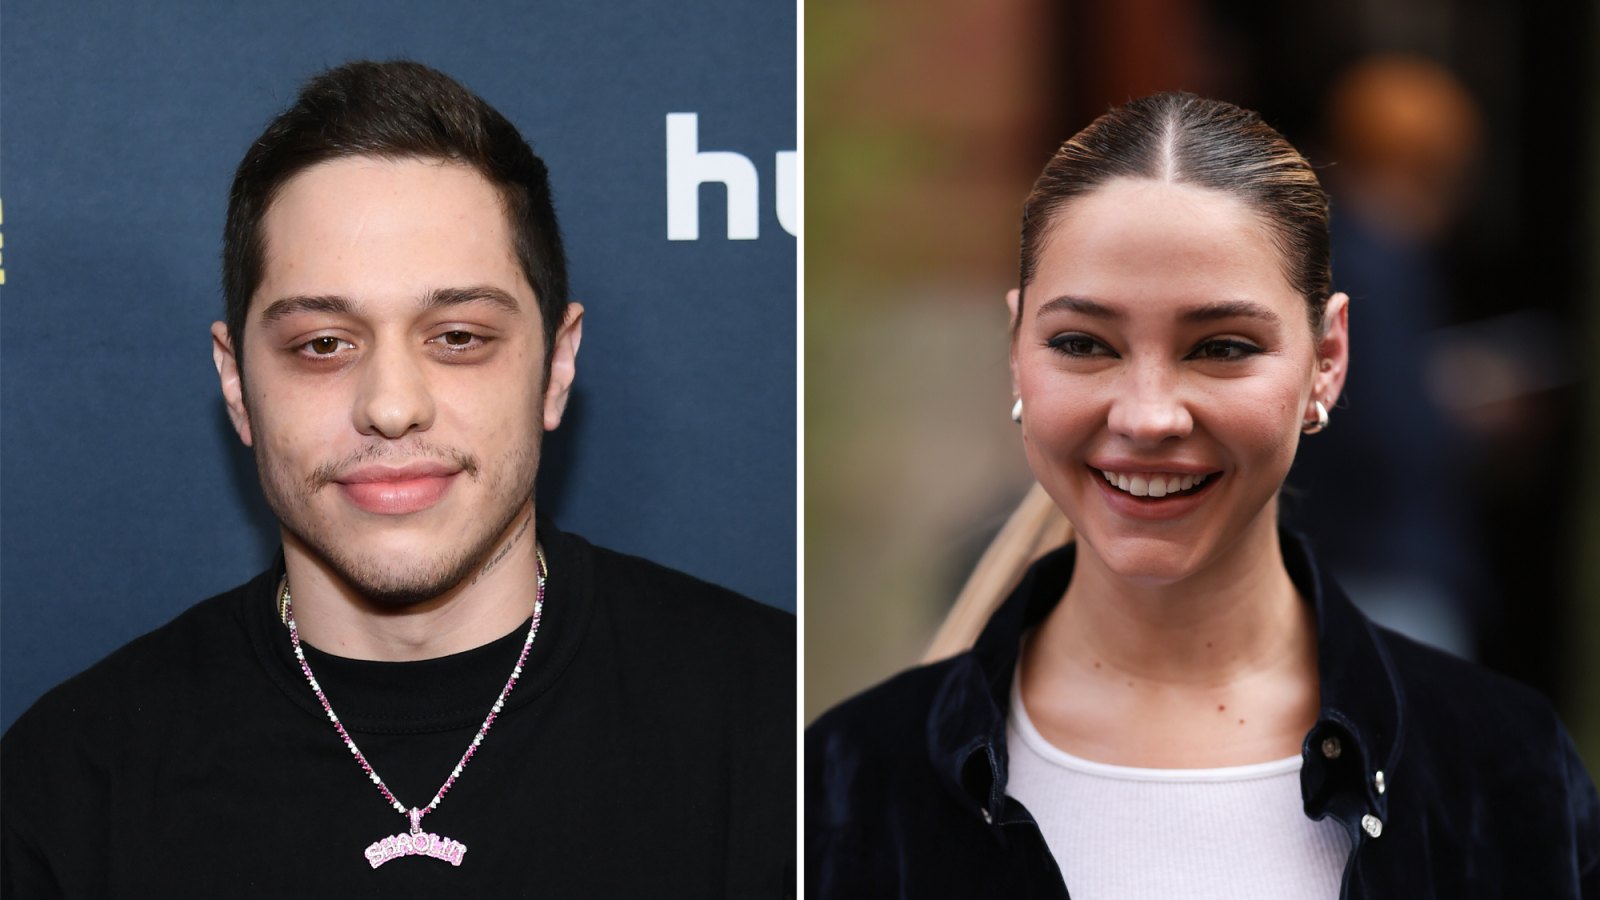 Pete Davidson and Madelyn Clines Surprise Romance Includes a Strong Bond